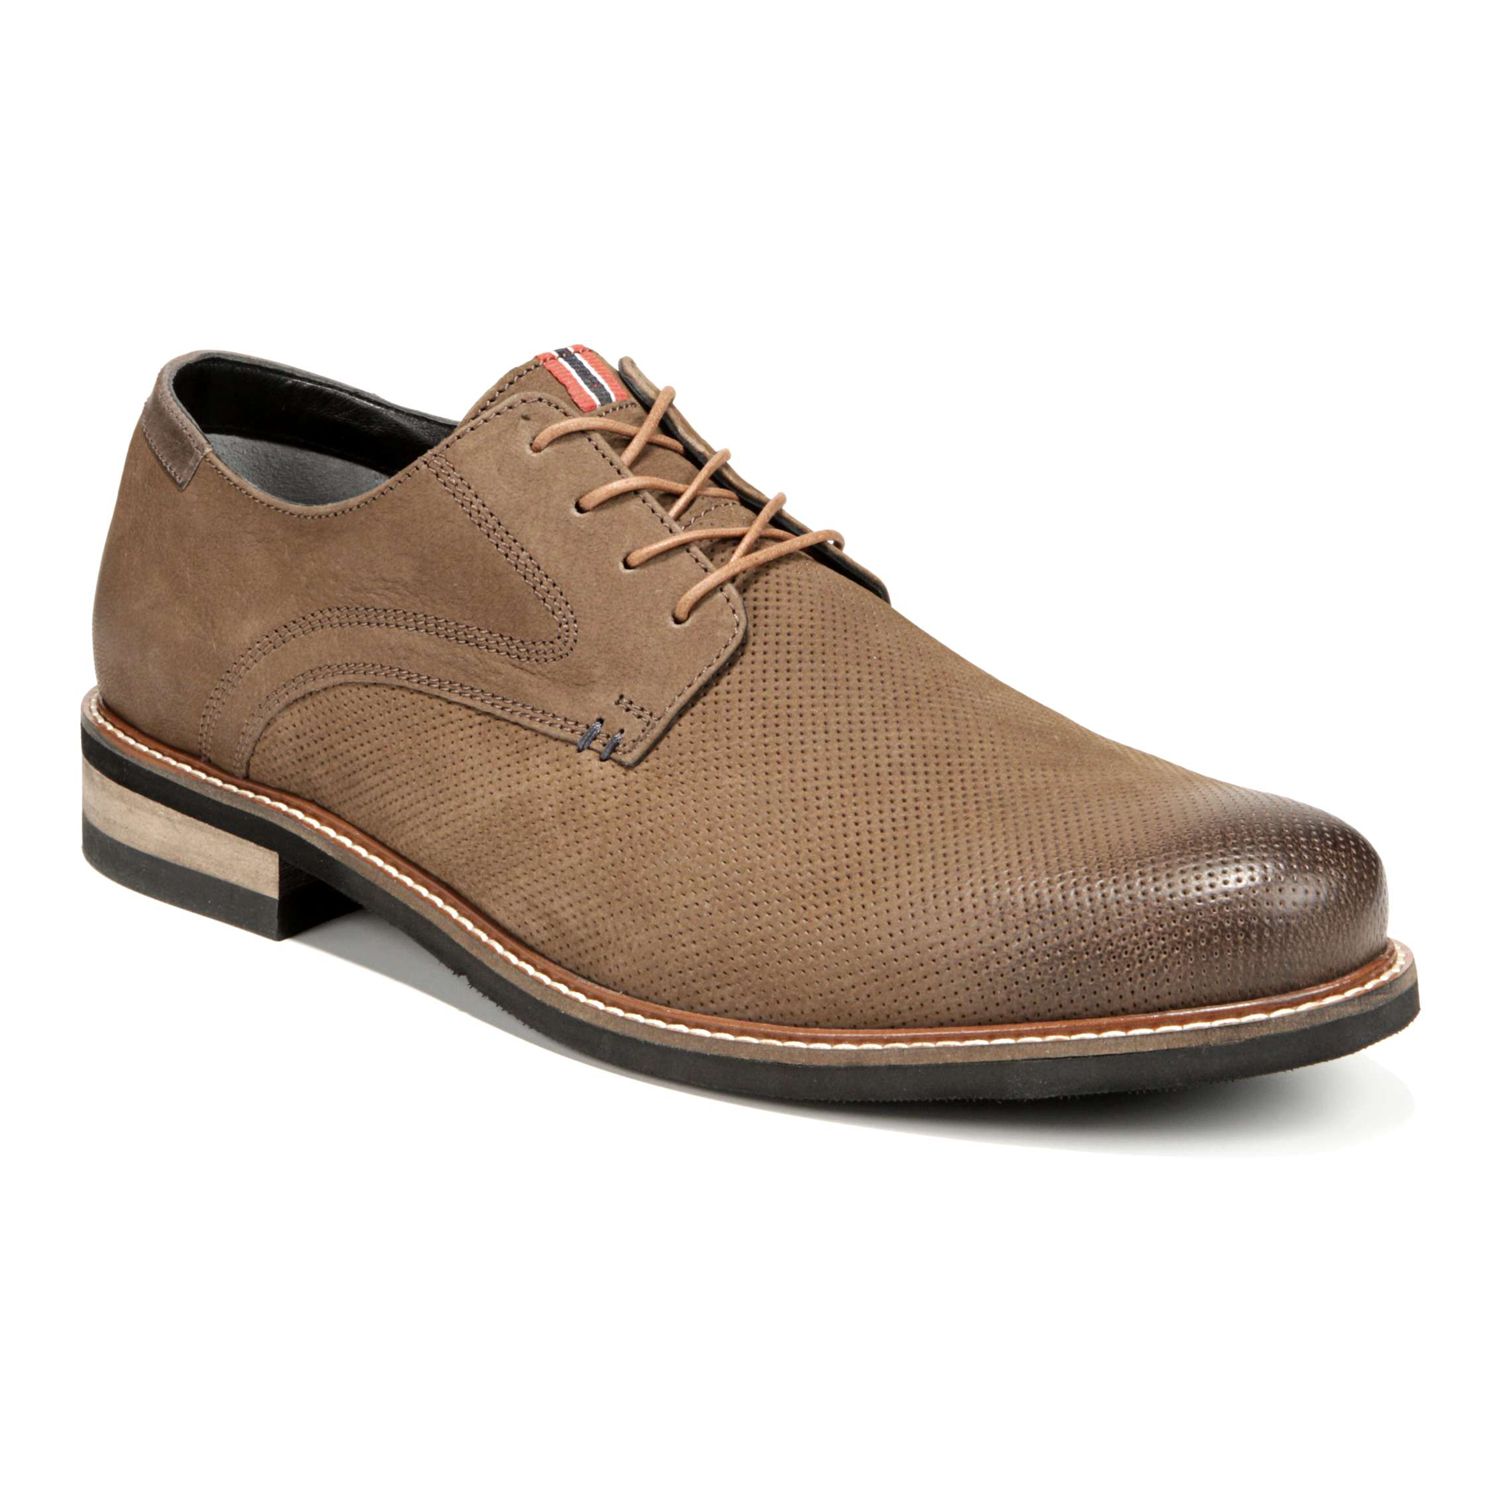 Image for Dr. Scholl's Weekly Men's Oxford Shoes at Kohl's.